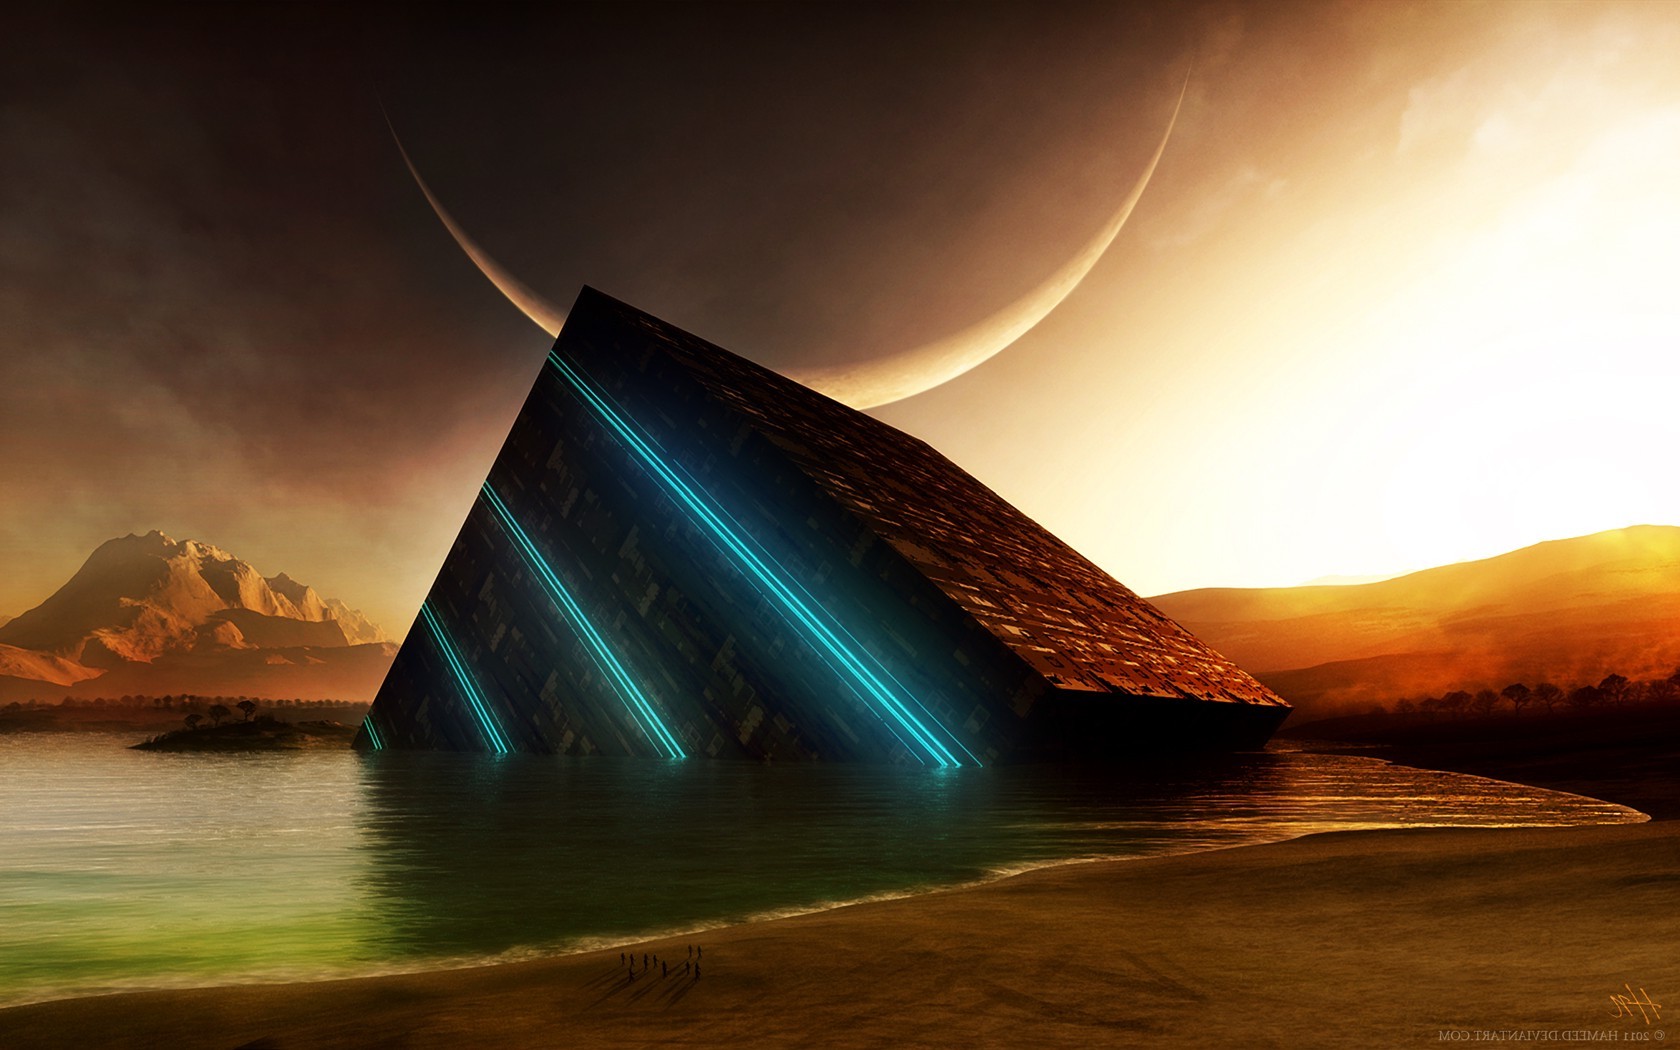 sunset, Abstract, Moon, Science fiction, Digital art, Water, Crescent moon, Cube, Mountains, Glowing Wallpaper